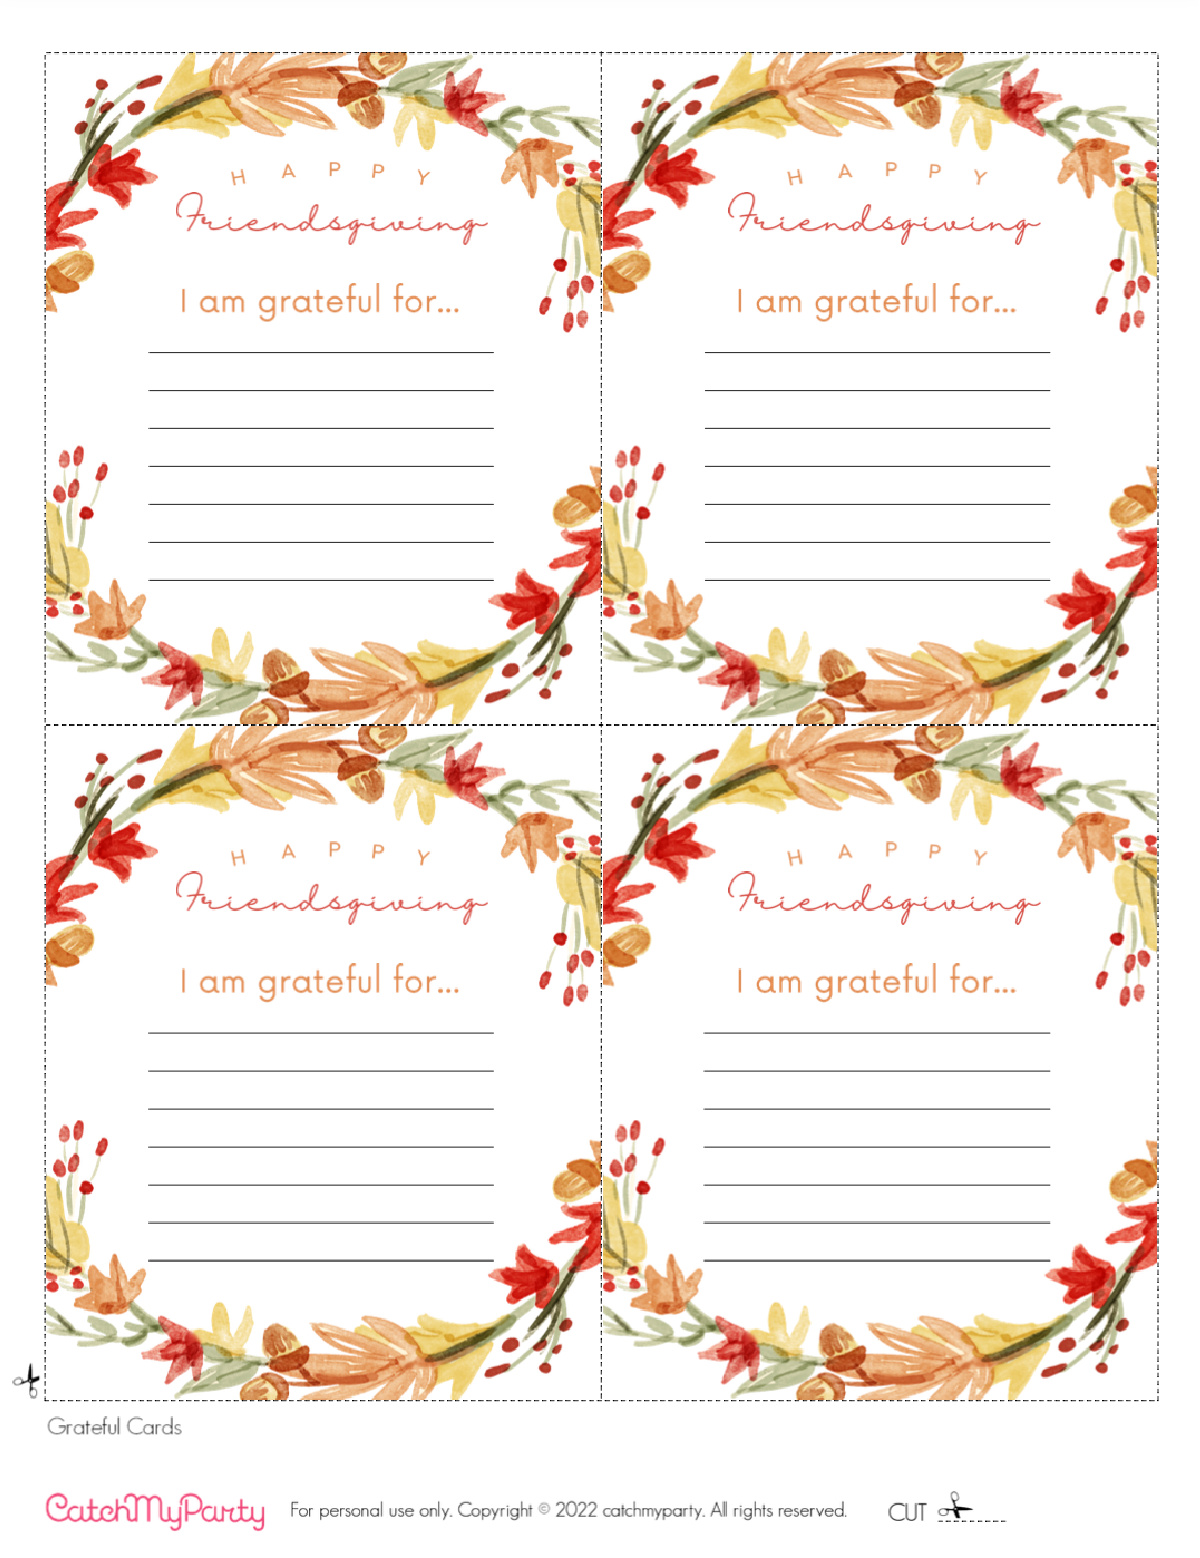 Download these FREE Friendsgiving Printables - "I am Grateful For..." Friendsgiving Cards